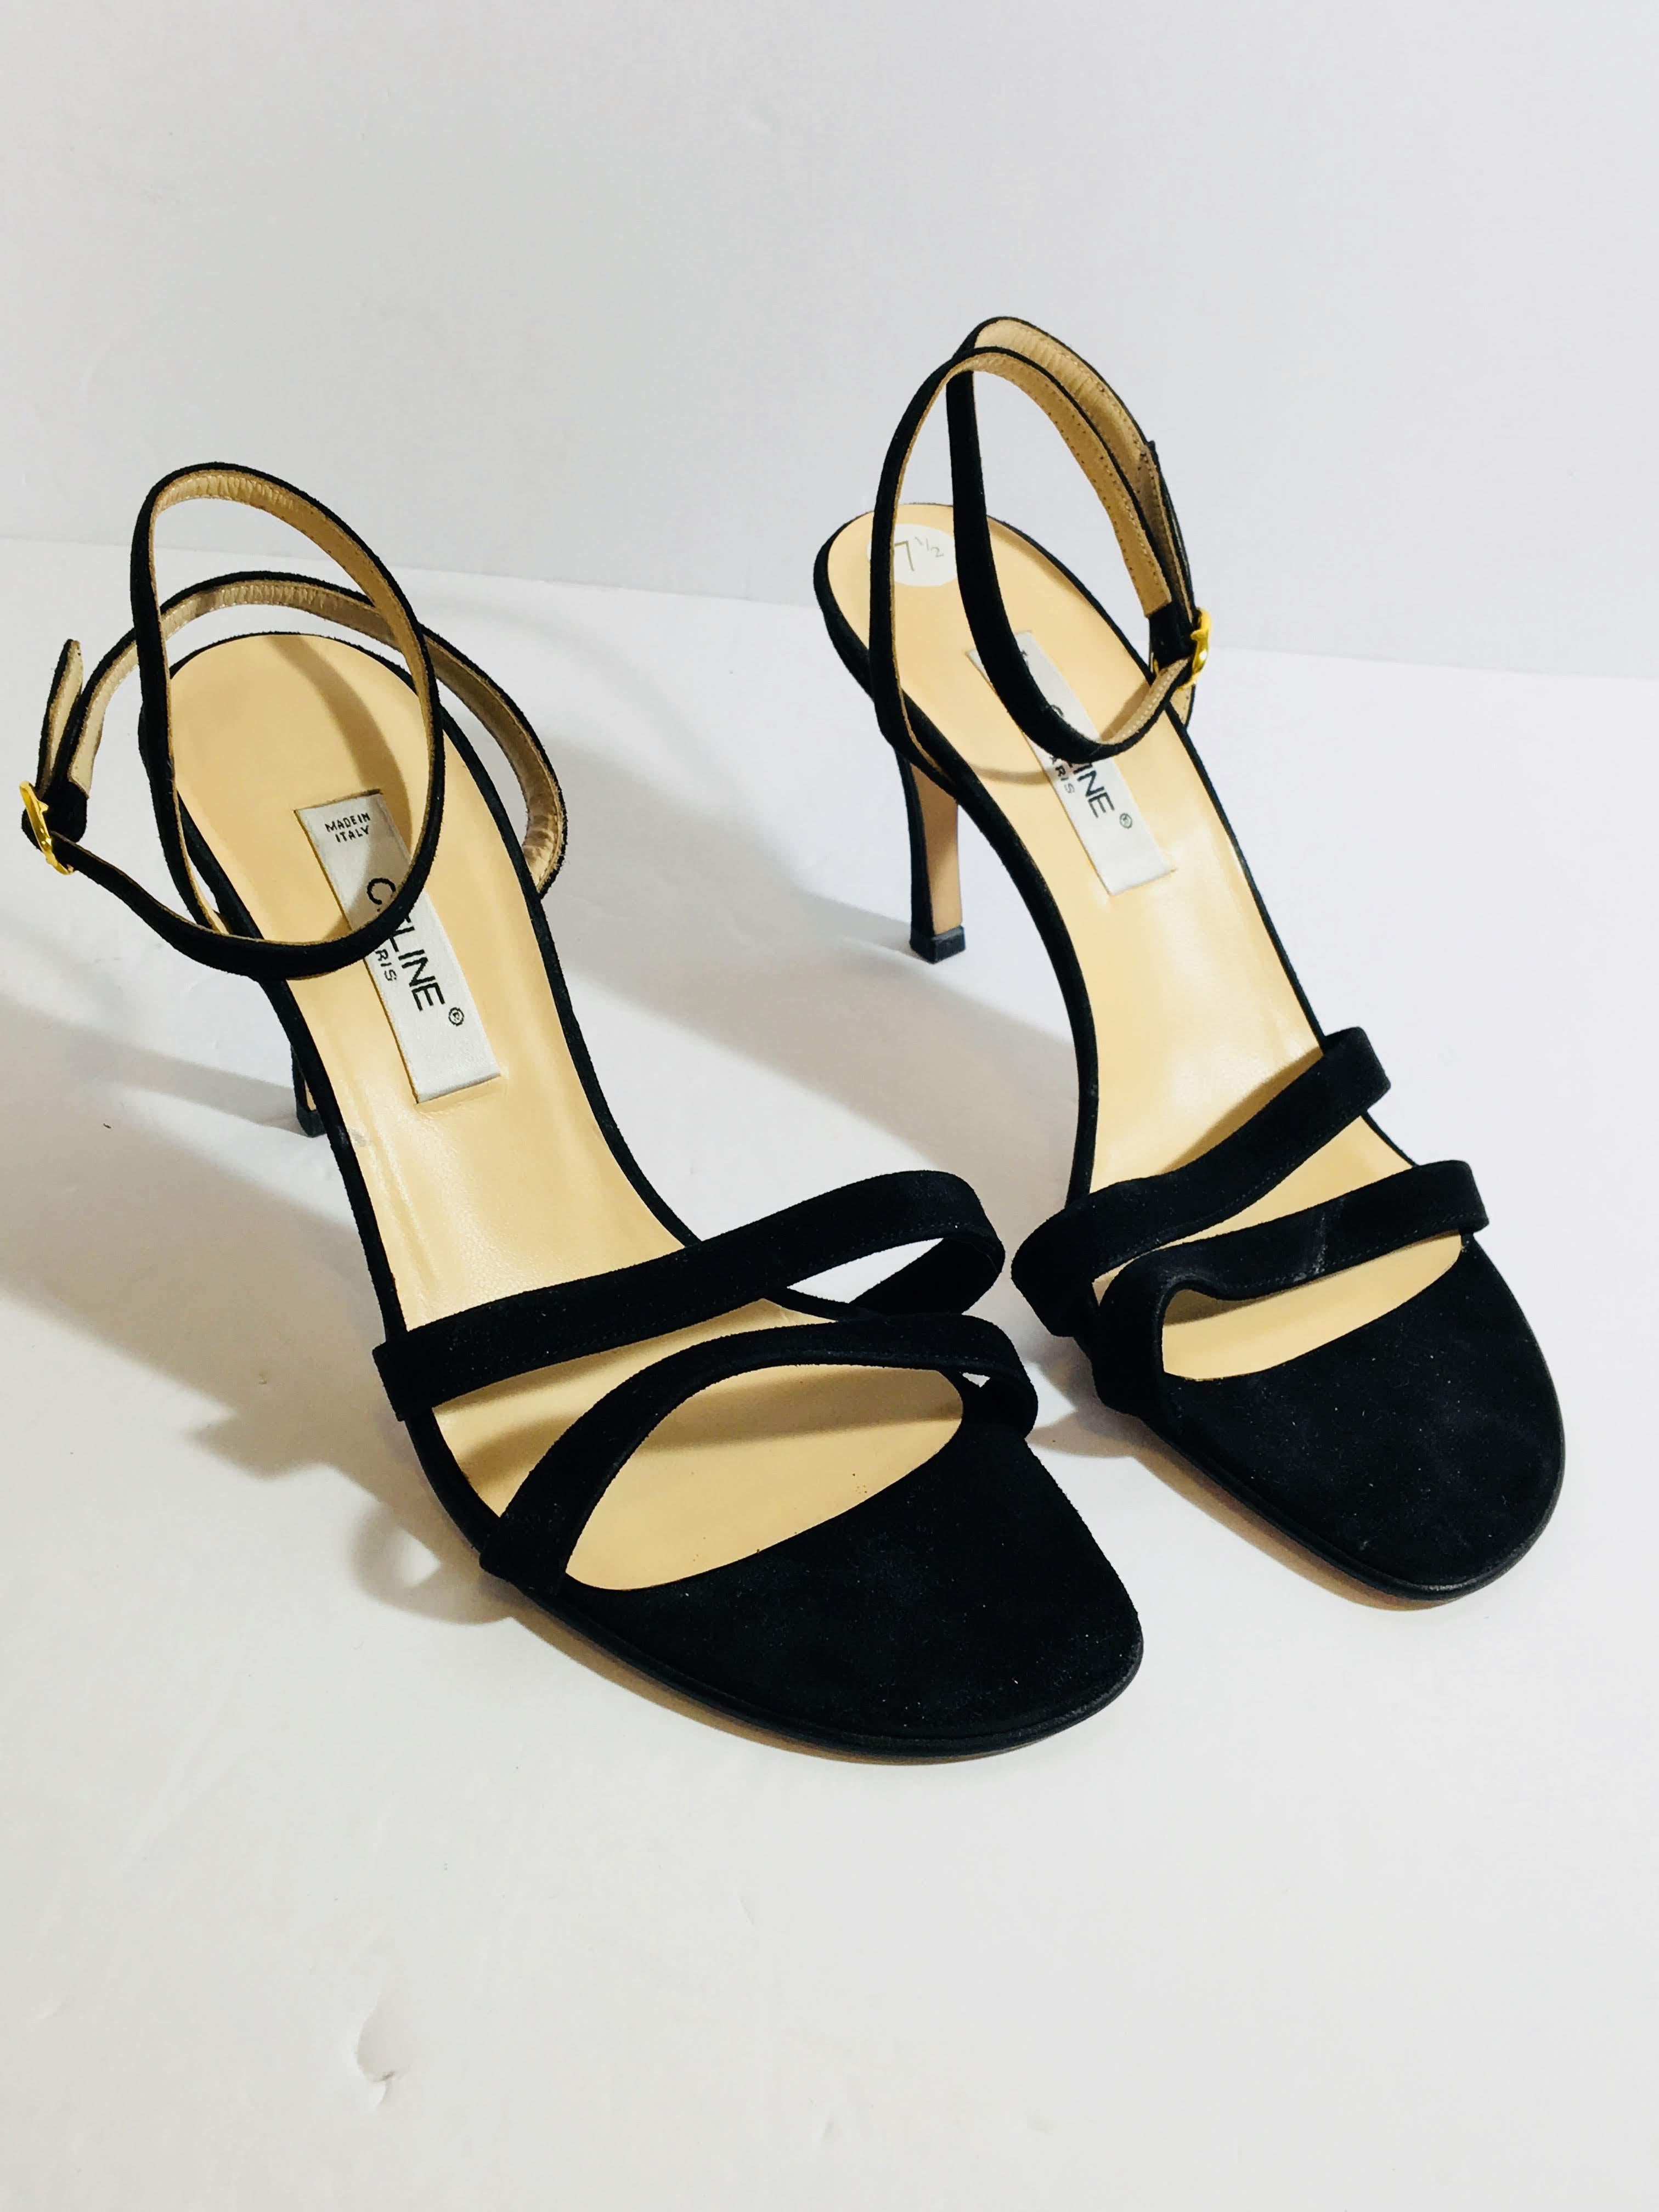 Celine Evening Sandals in Black Suede with Gold Hardware and Ankle Wrap.